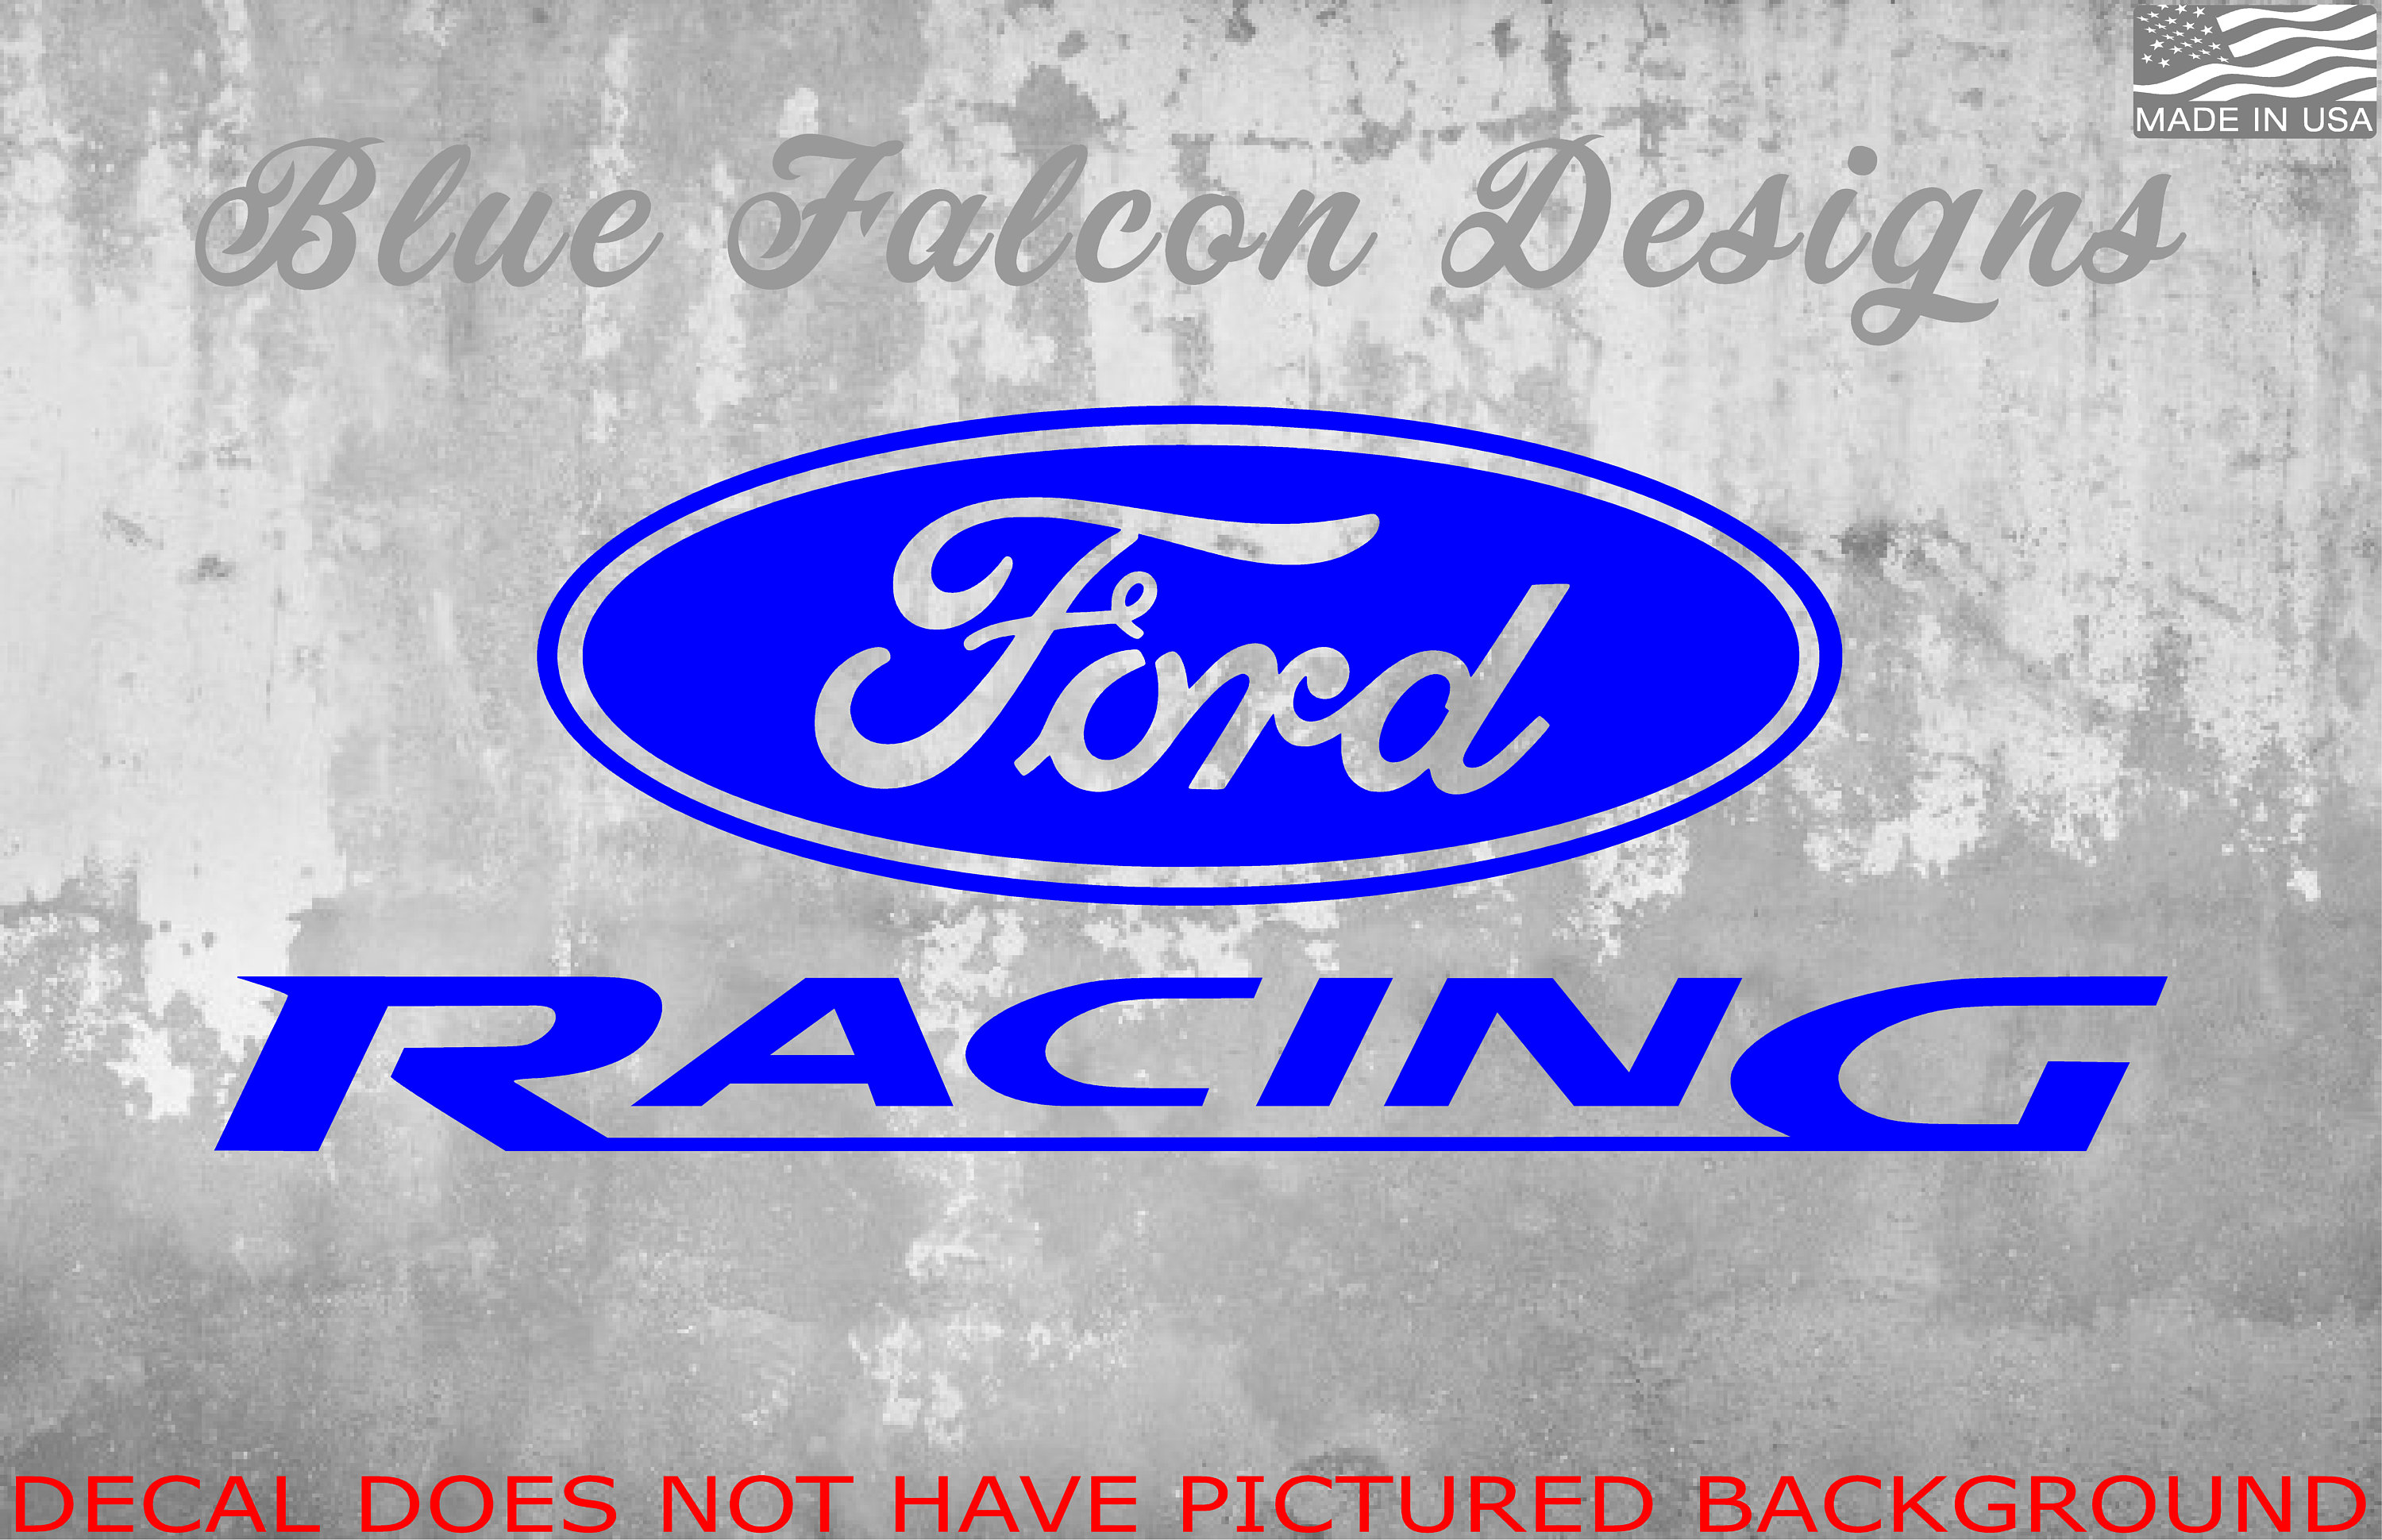 4x Ford Performance / Racing logo decals, stickers, quality vinyl &  laminated